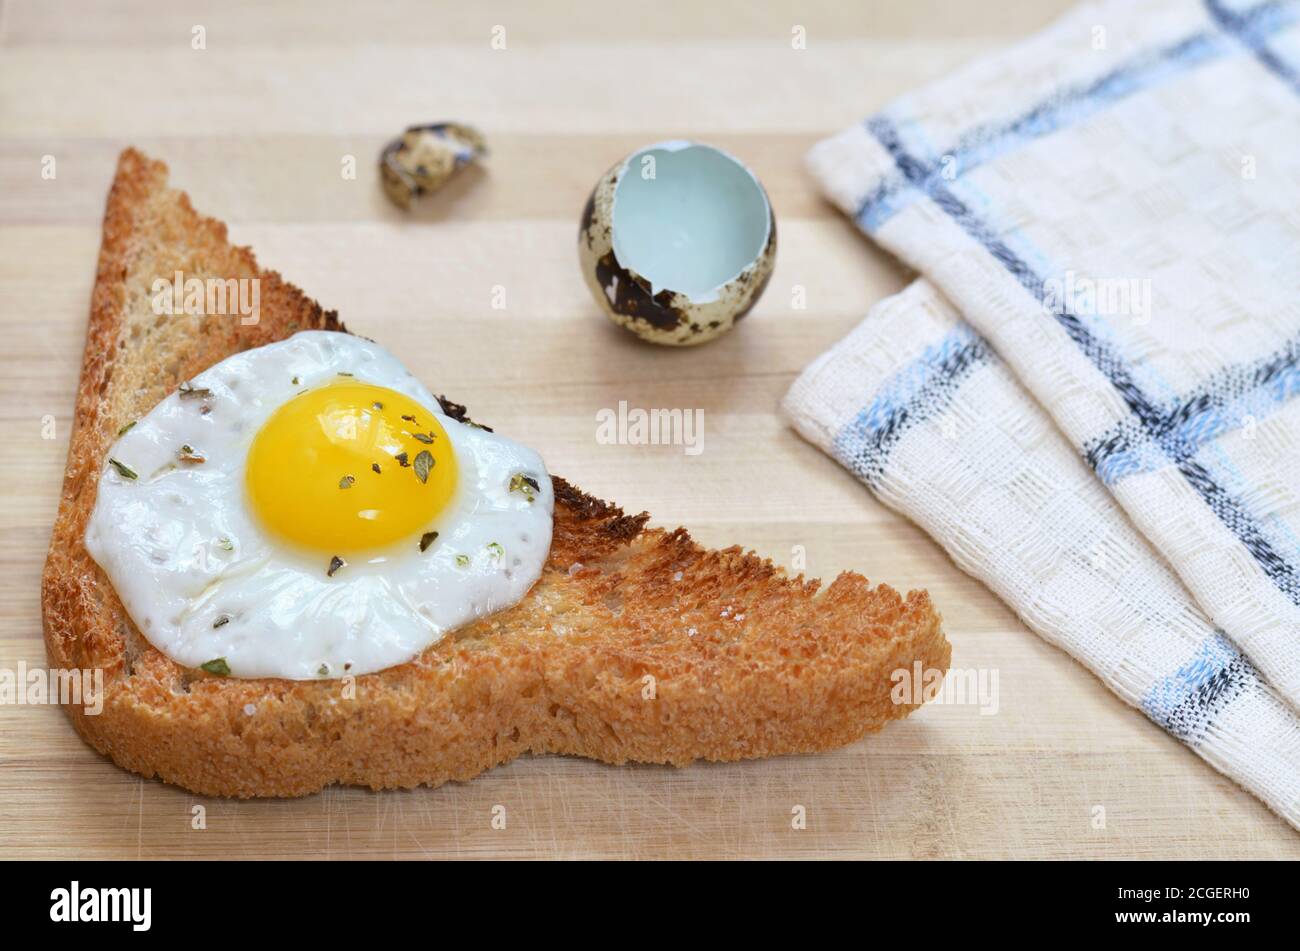 Toasted bread with fried quail egg on a wooden cutting board with a kitchen towel and eggshells, selective focus. Healthy breakfast. Stock Photo